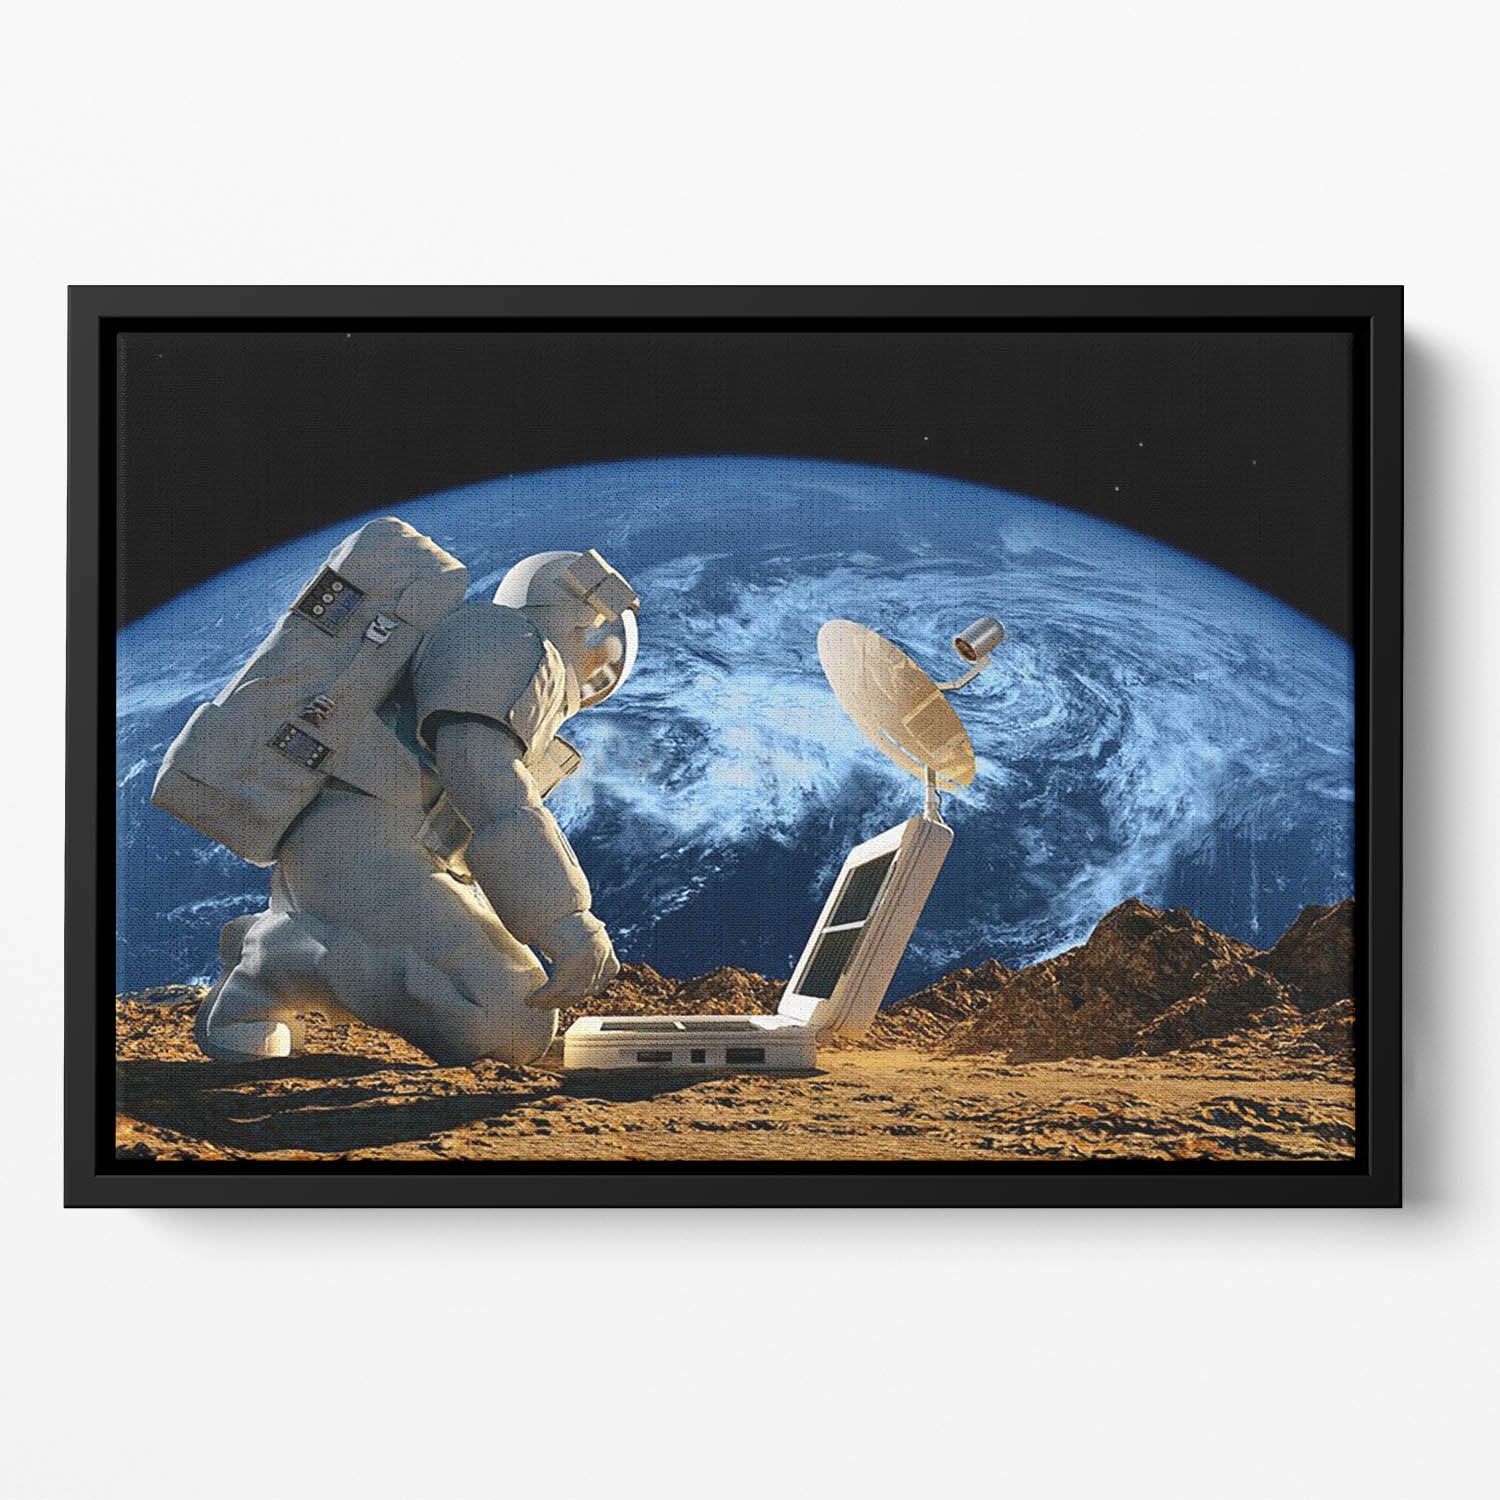 Astronaut working on the Moon Floating Framed Canvas